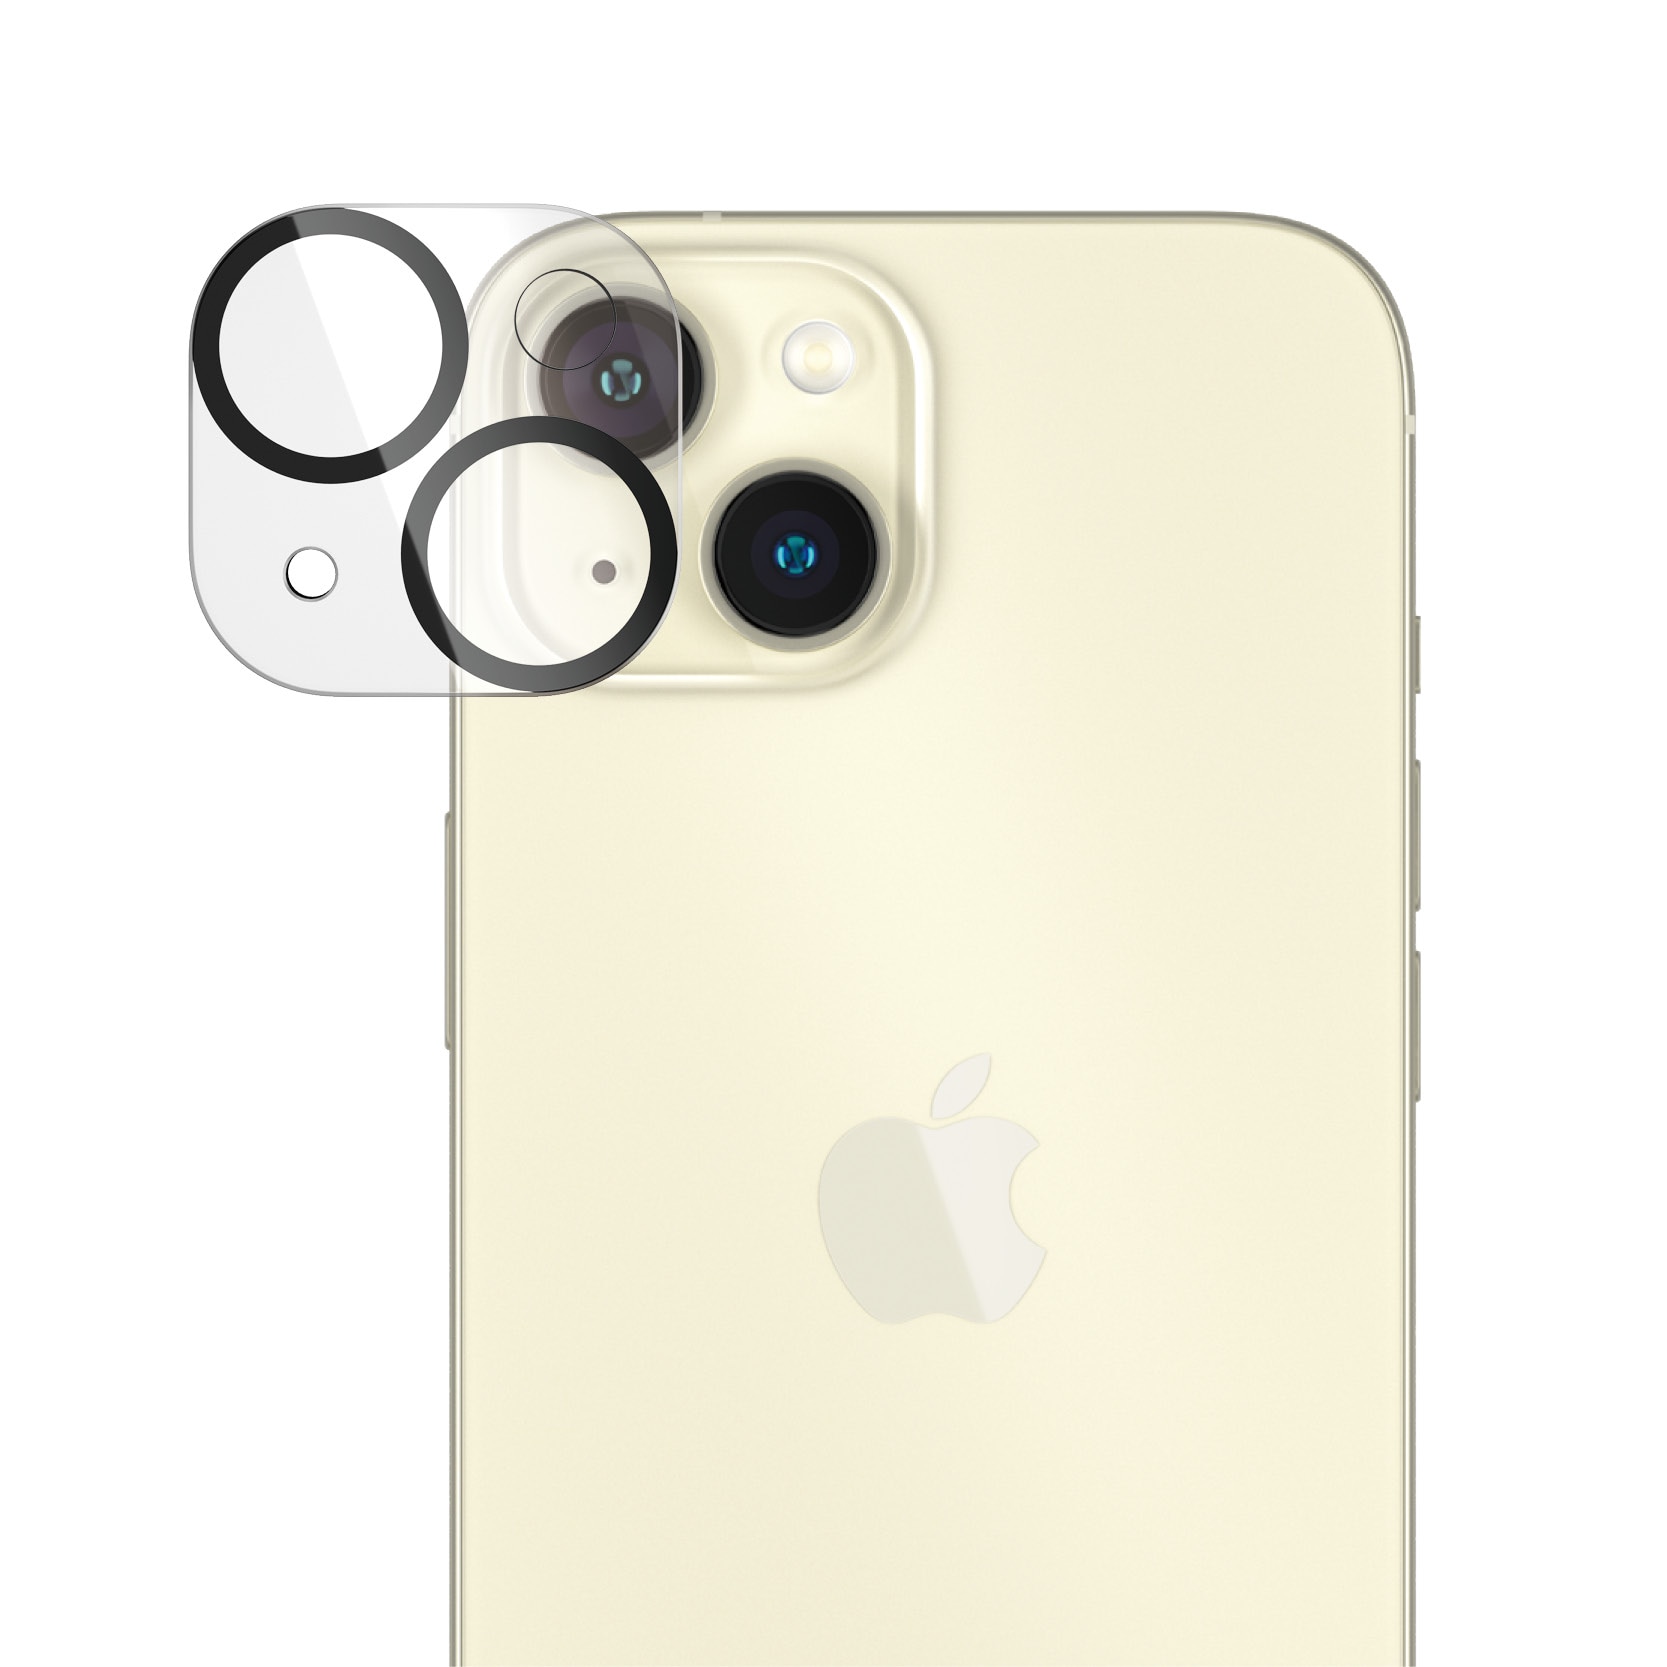 iPhone 15 Camera Lens Protector PicturePerfect